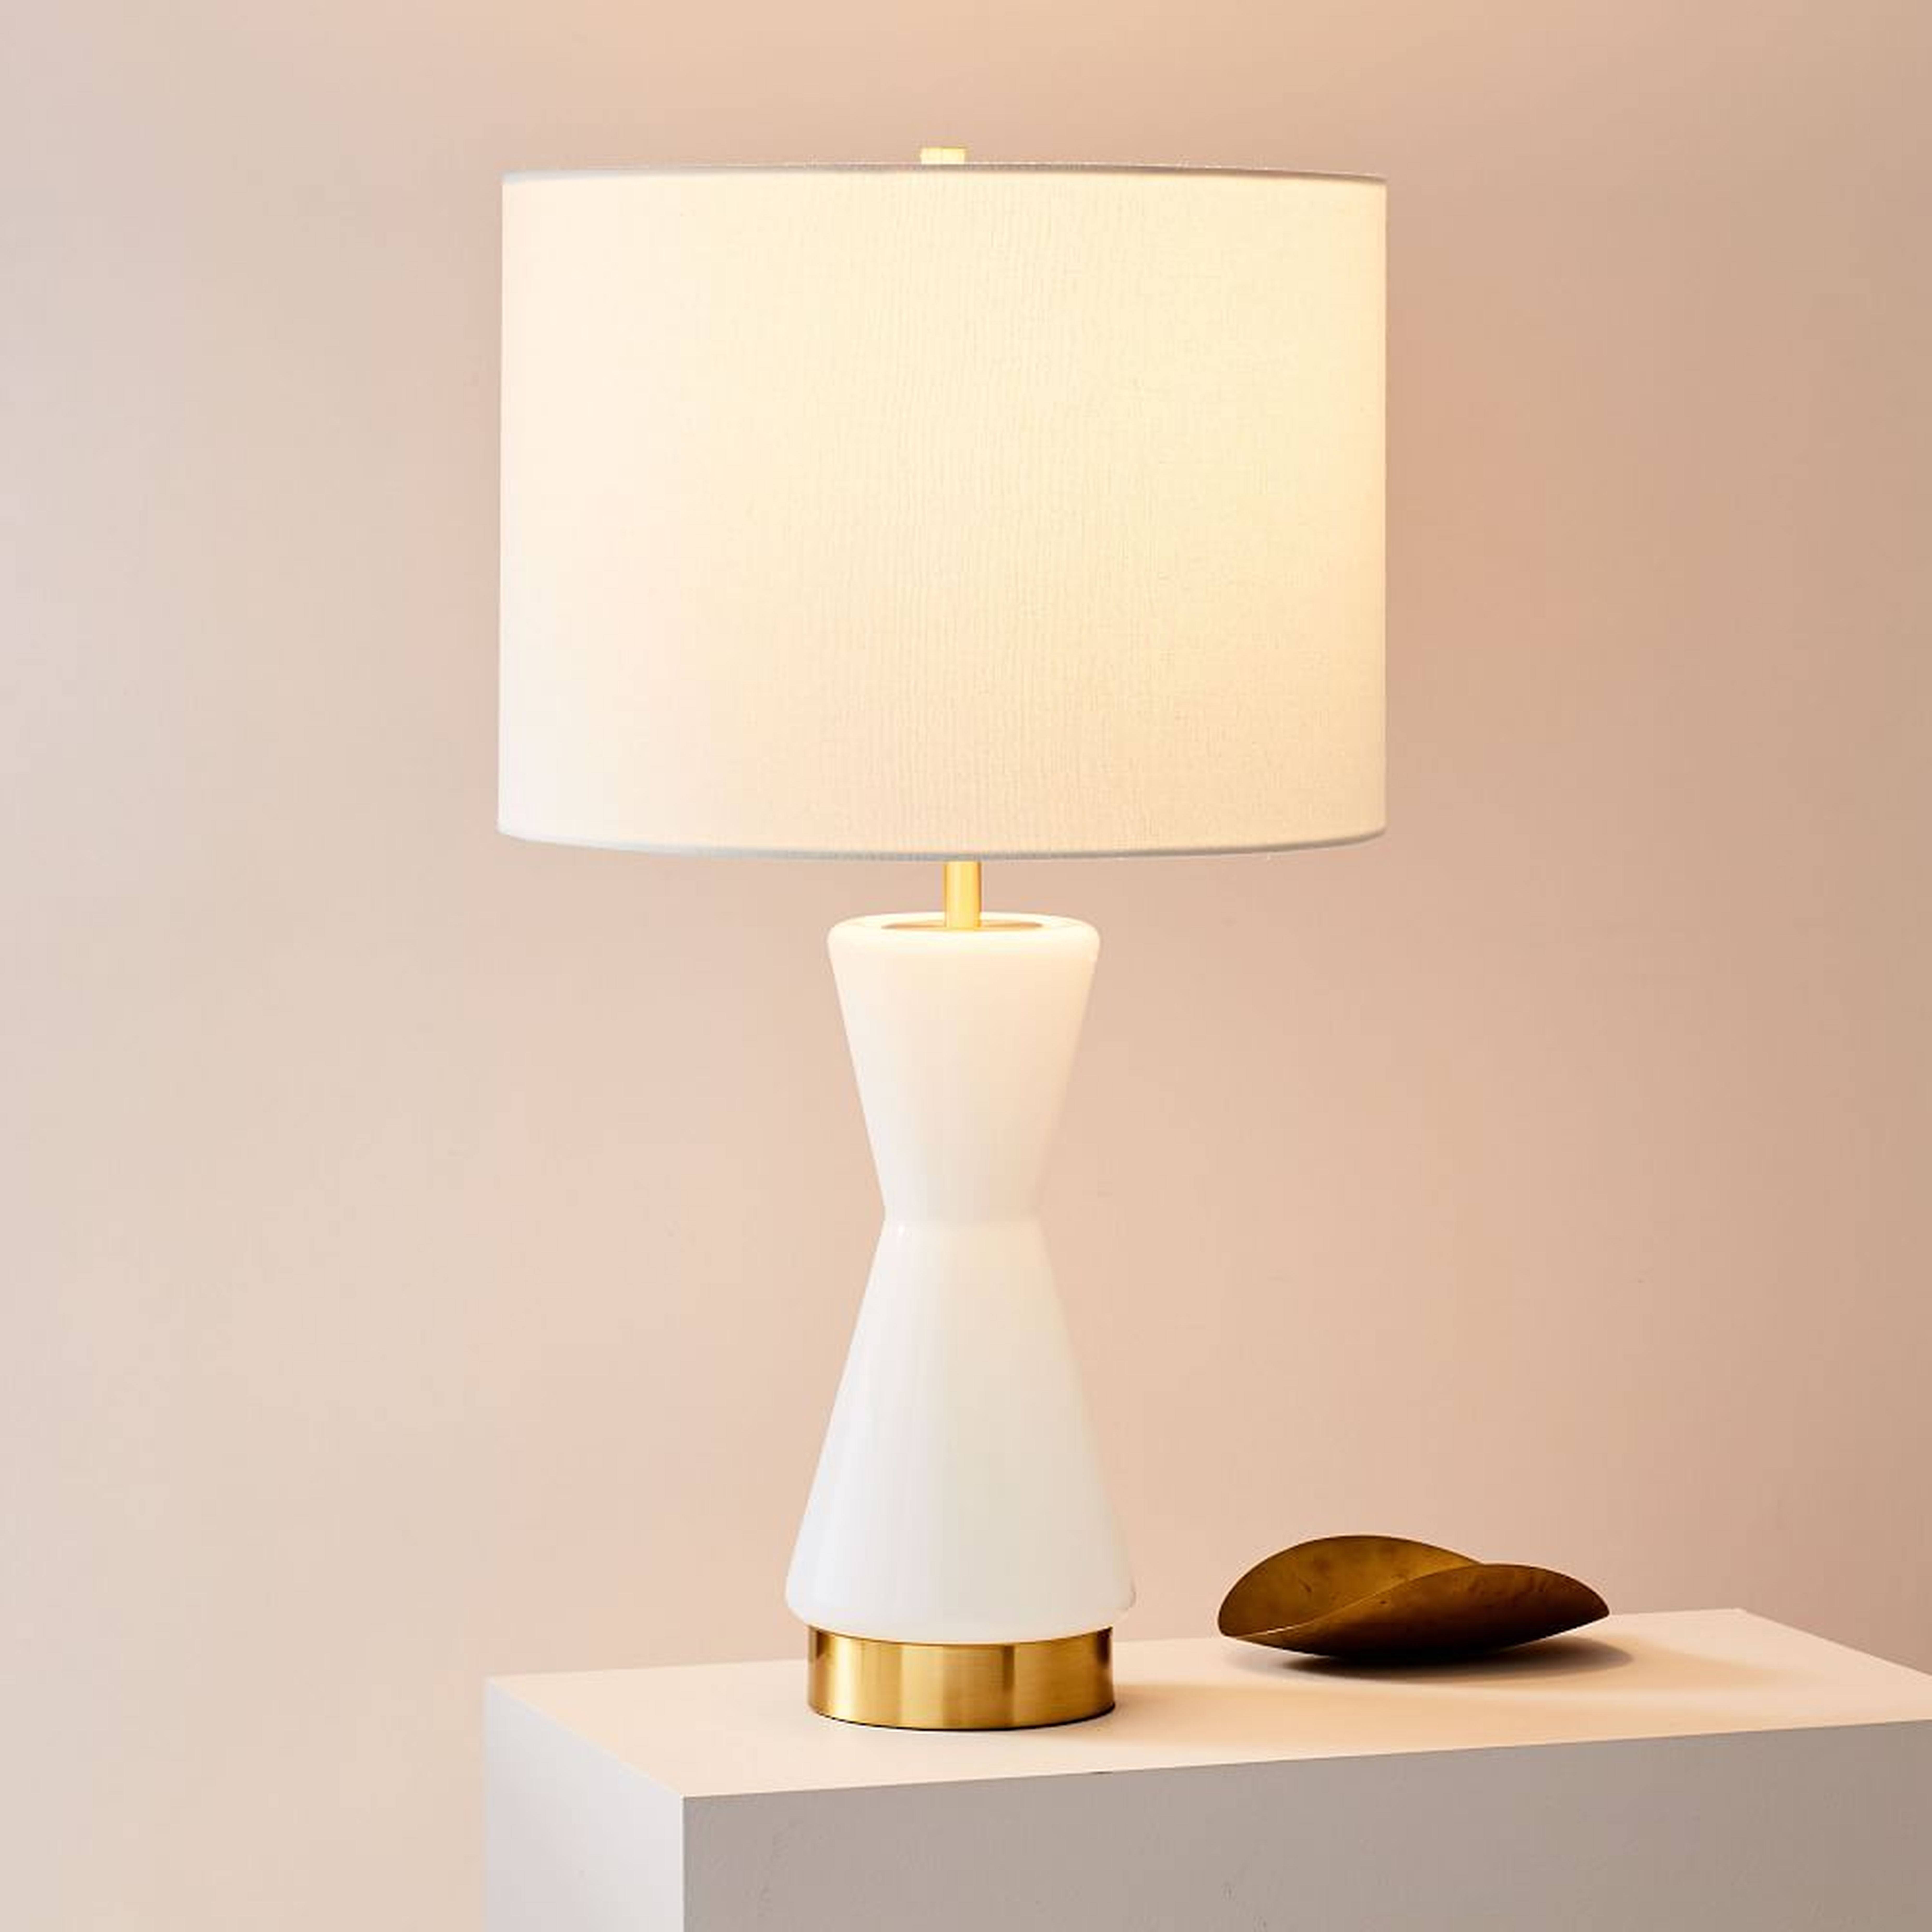 Metalized Glass Table Lamp + USB, Large, White, Antique Brass, Individual - West Elm